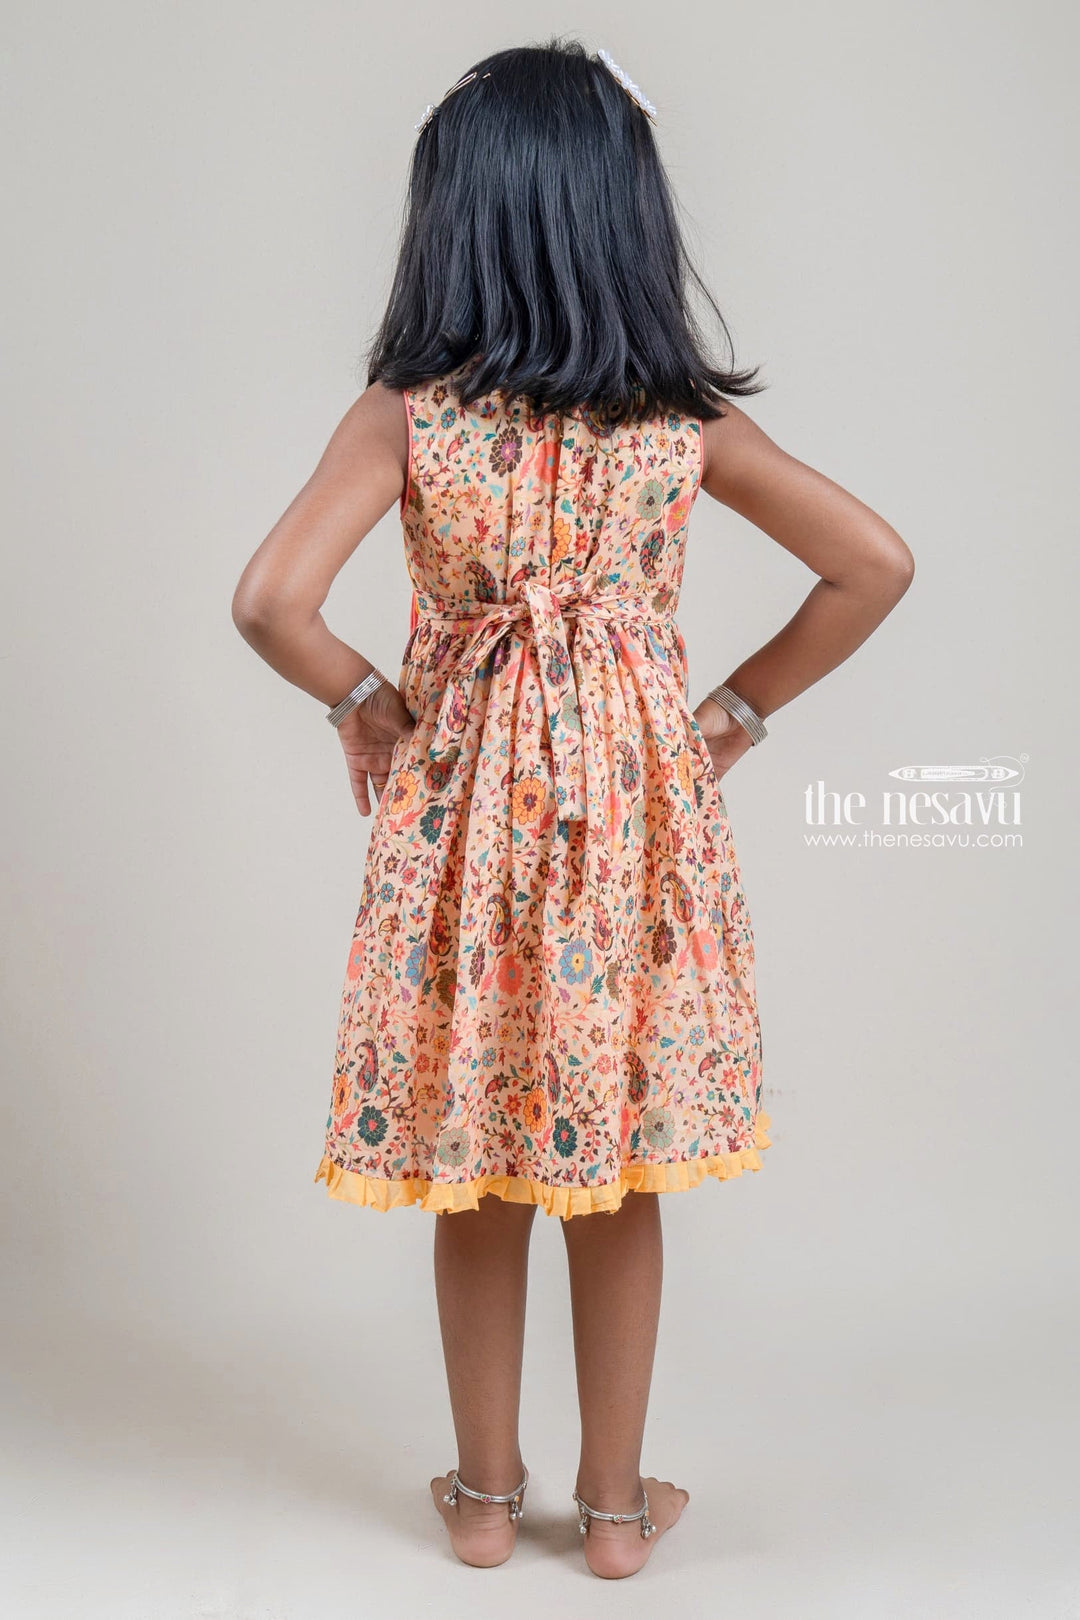 The Nesavu Girls Fancy Frock Gorgeous Beige Paisley N Floral Printed Pleated Casual Frock For Girls Nesavu Paisley Printed Frock For Girls | New Arrival | The Nesavu